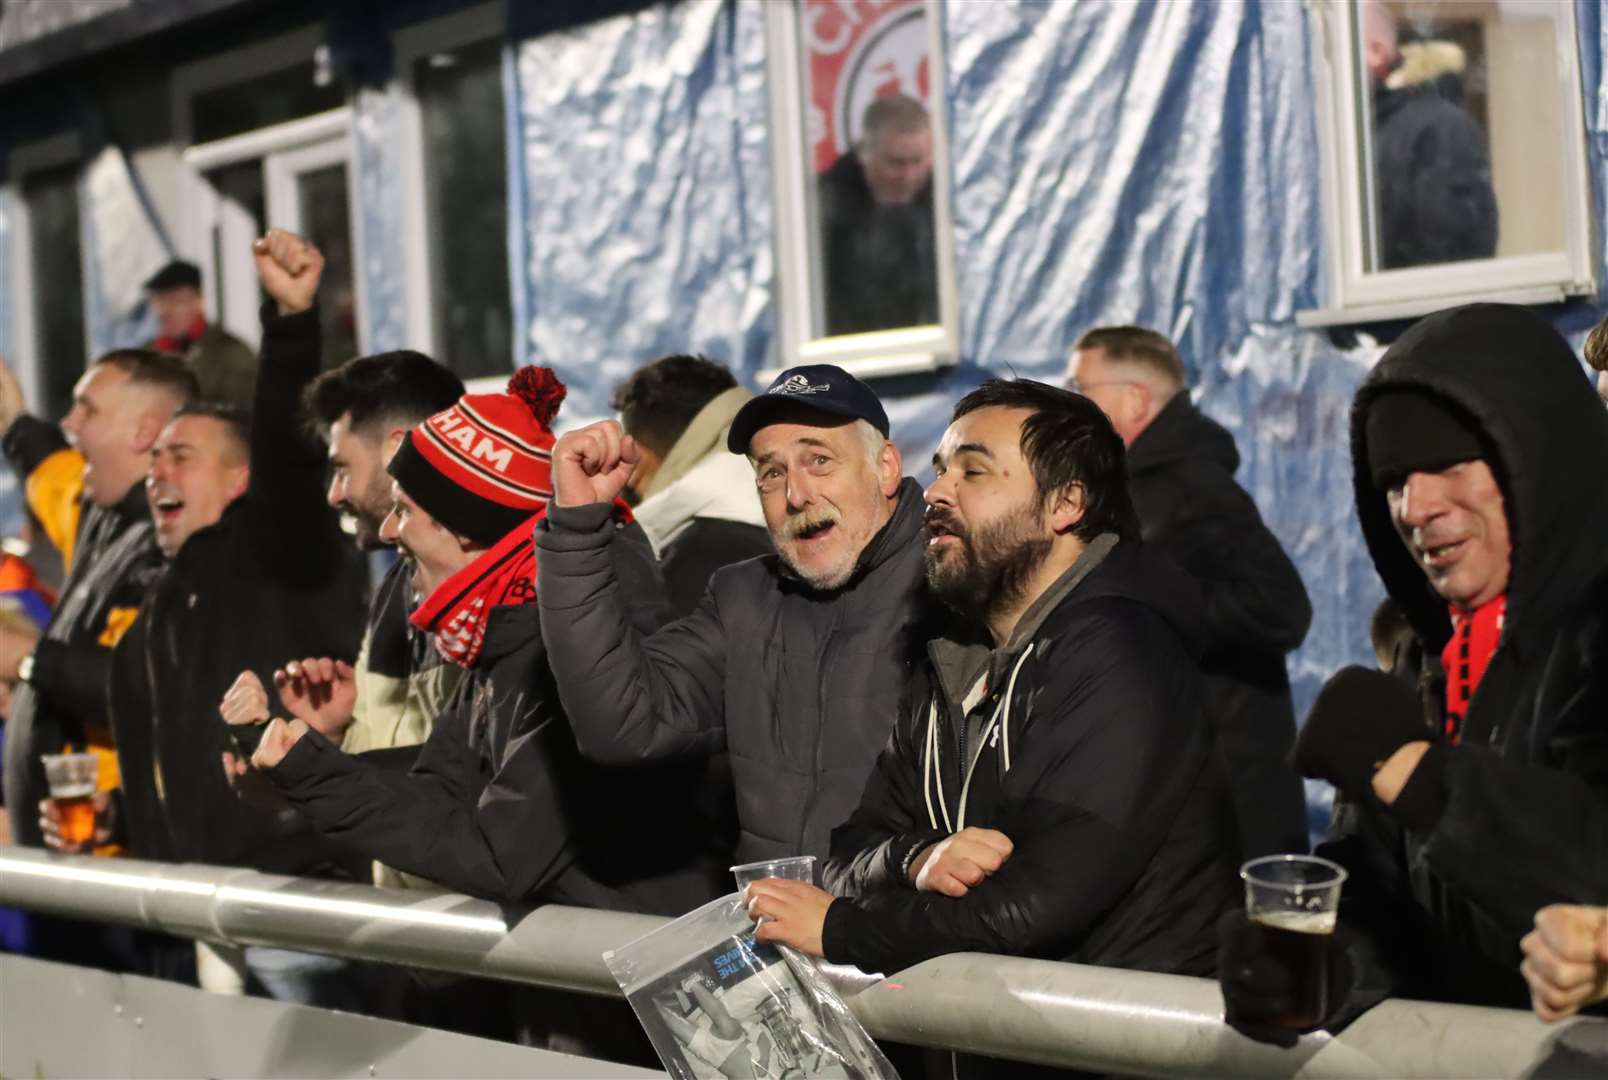 Chatham fans celebrate a recent win over Enfield Town Picture: Max English (@max_ePhotos)